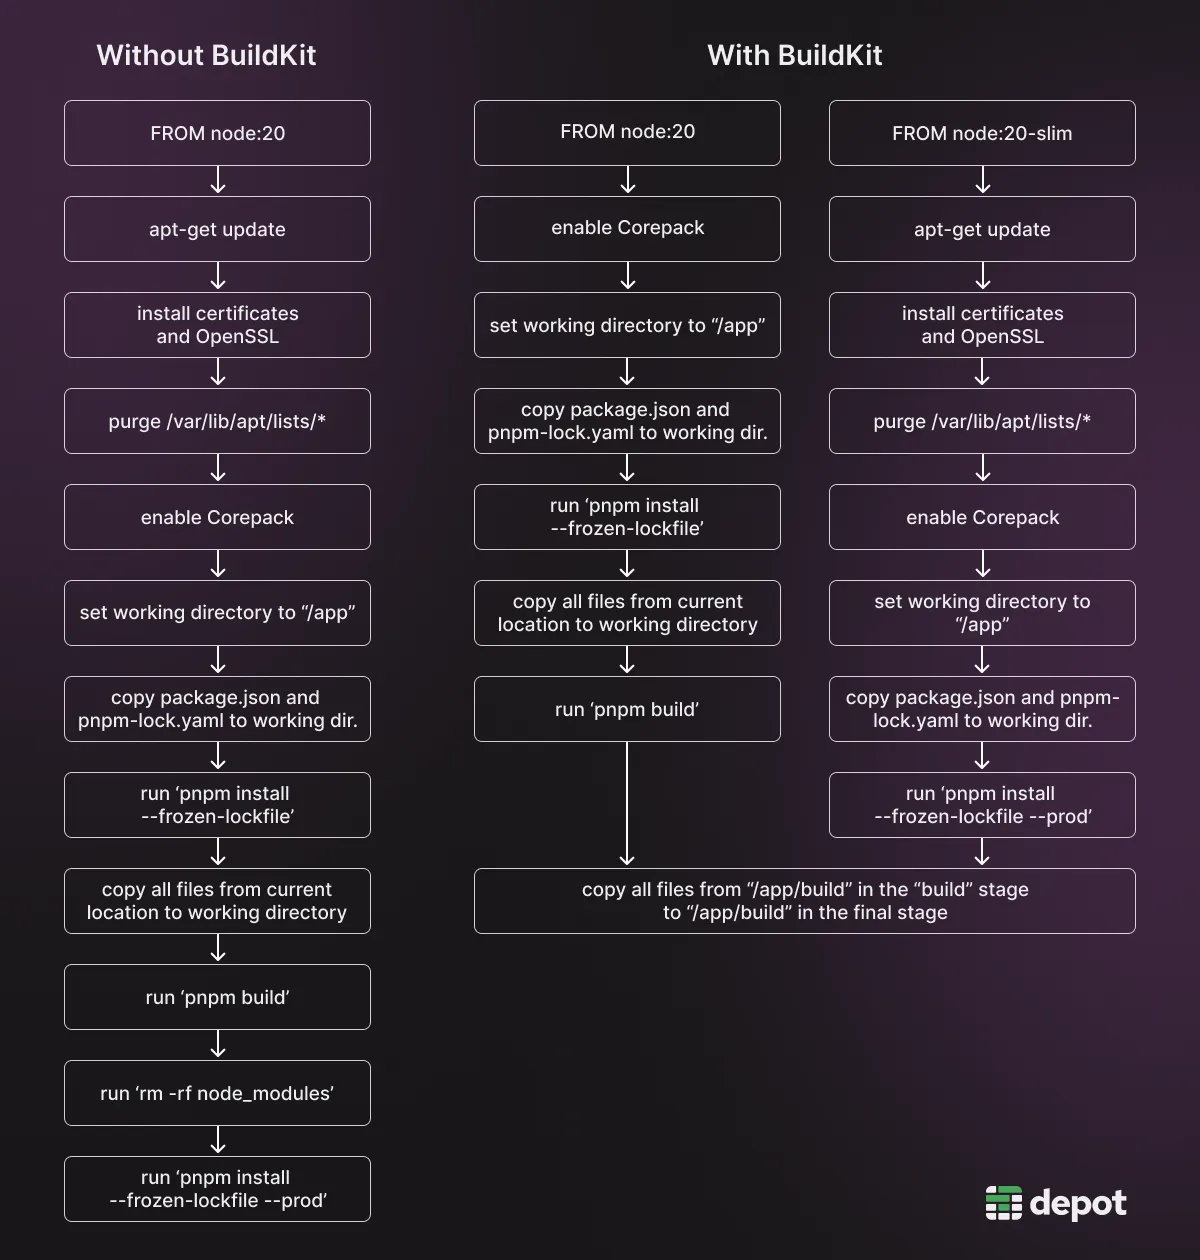 Flow diagram showing how the different RUN statements of a Dockerfile are processed, with and without BuildKit. The “without BuildKit” diagram shows a sequential line of steps. The “with BuildKit” diagram shows two branches where stages are running in parallel.